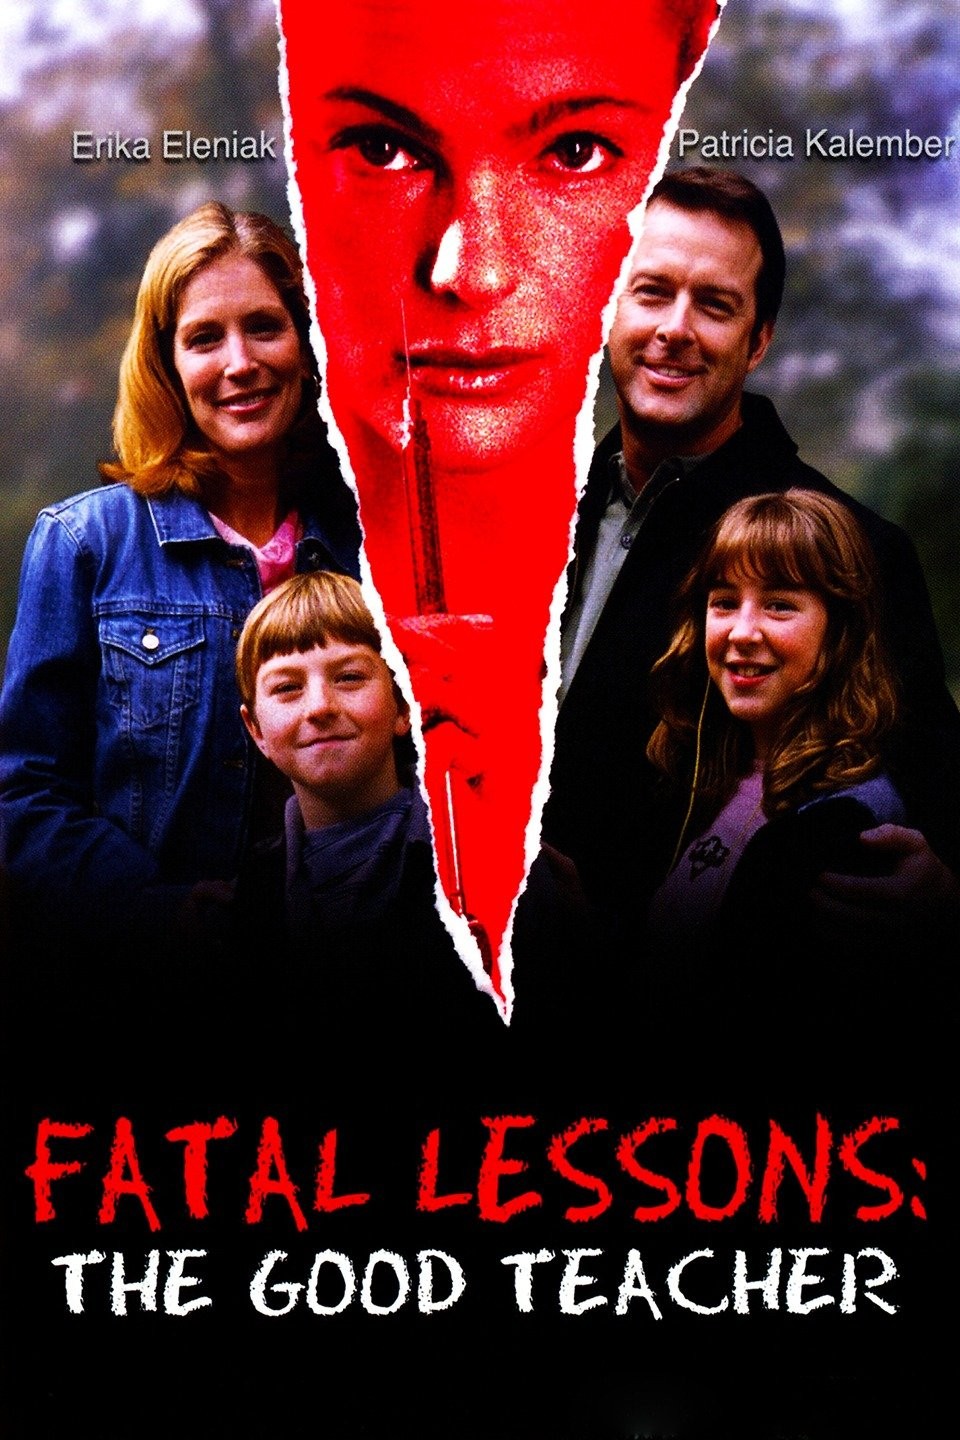 Fatal lessons in this pandemic anime